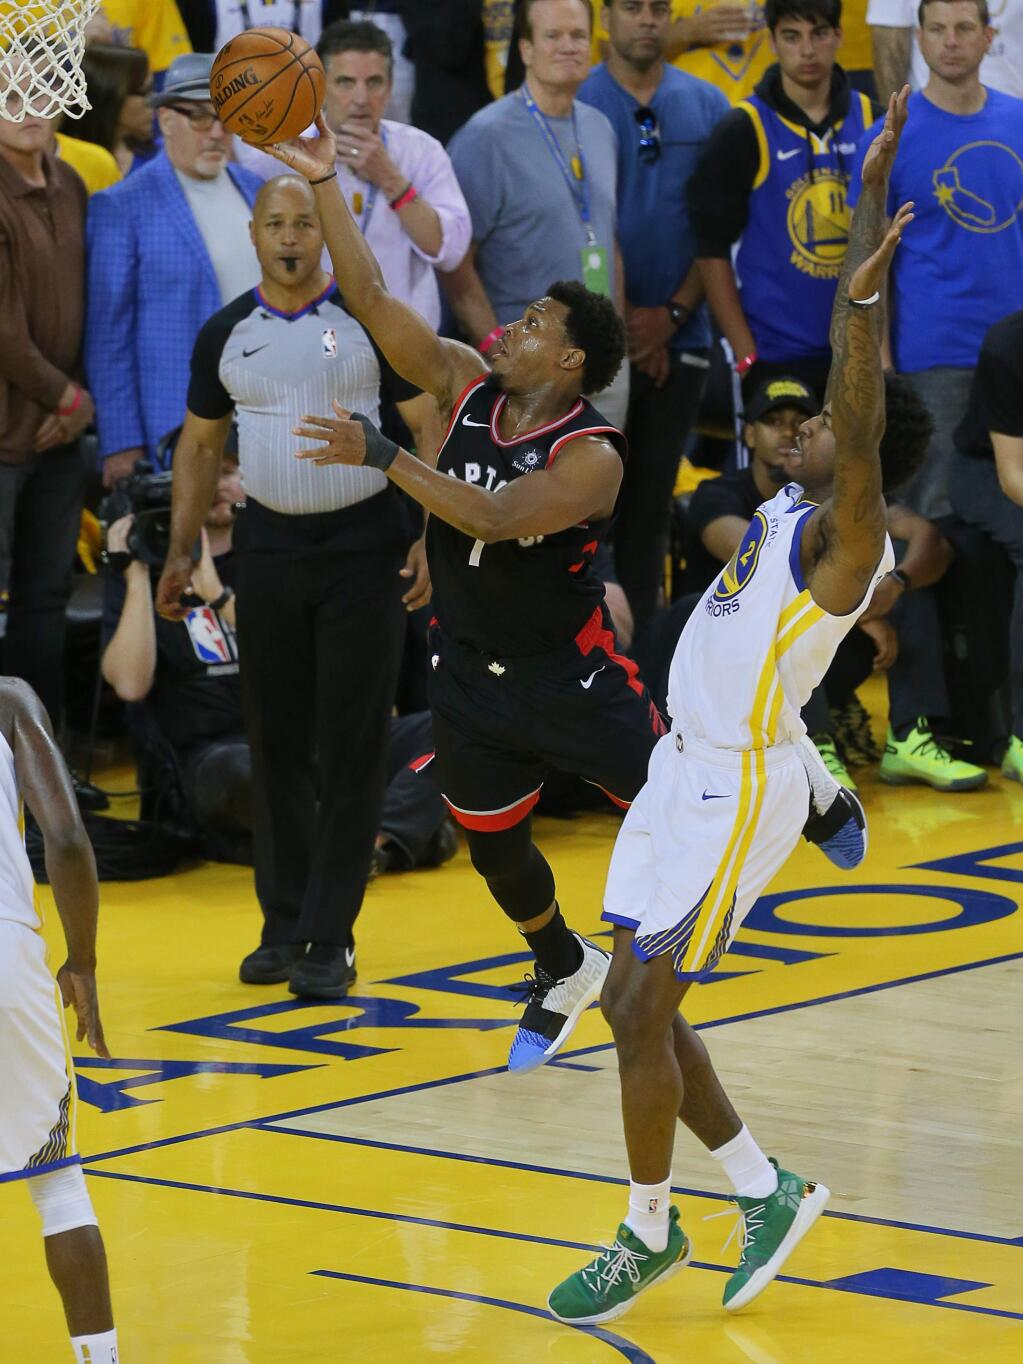 Toronto Raptors guard Kyle Lowry lays the ball in past Golden State Warriors forward Jordan Bell during game 3 of the NBA Finals in Oakland on Wednesday, June 5, 2019. (Christopher Chung/ The Press Democrat)